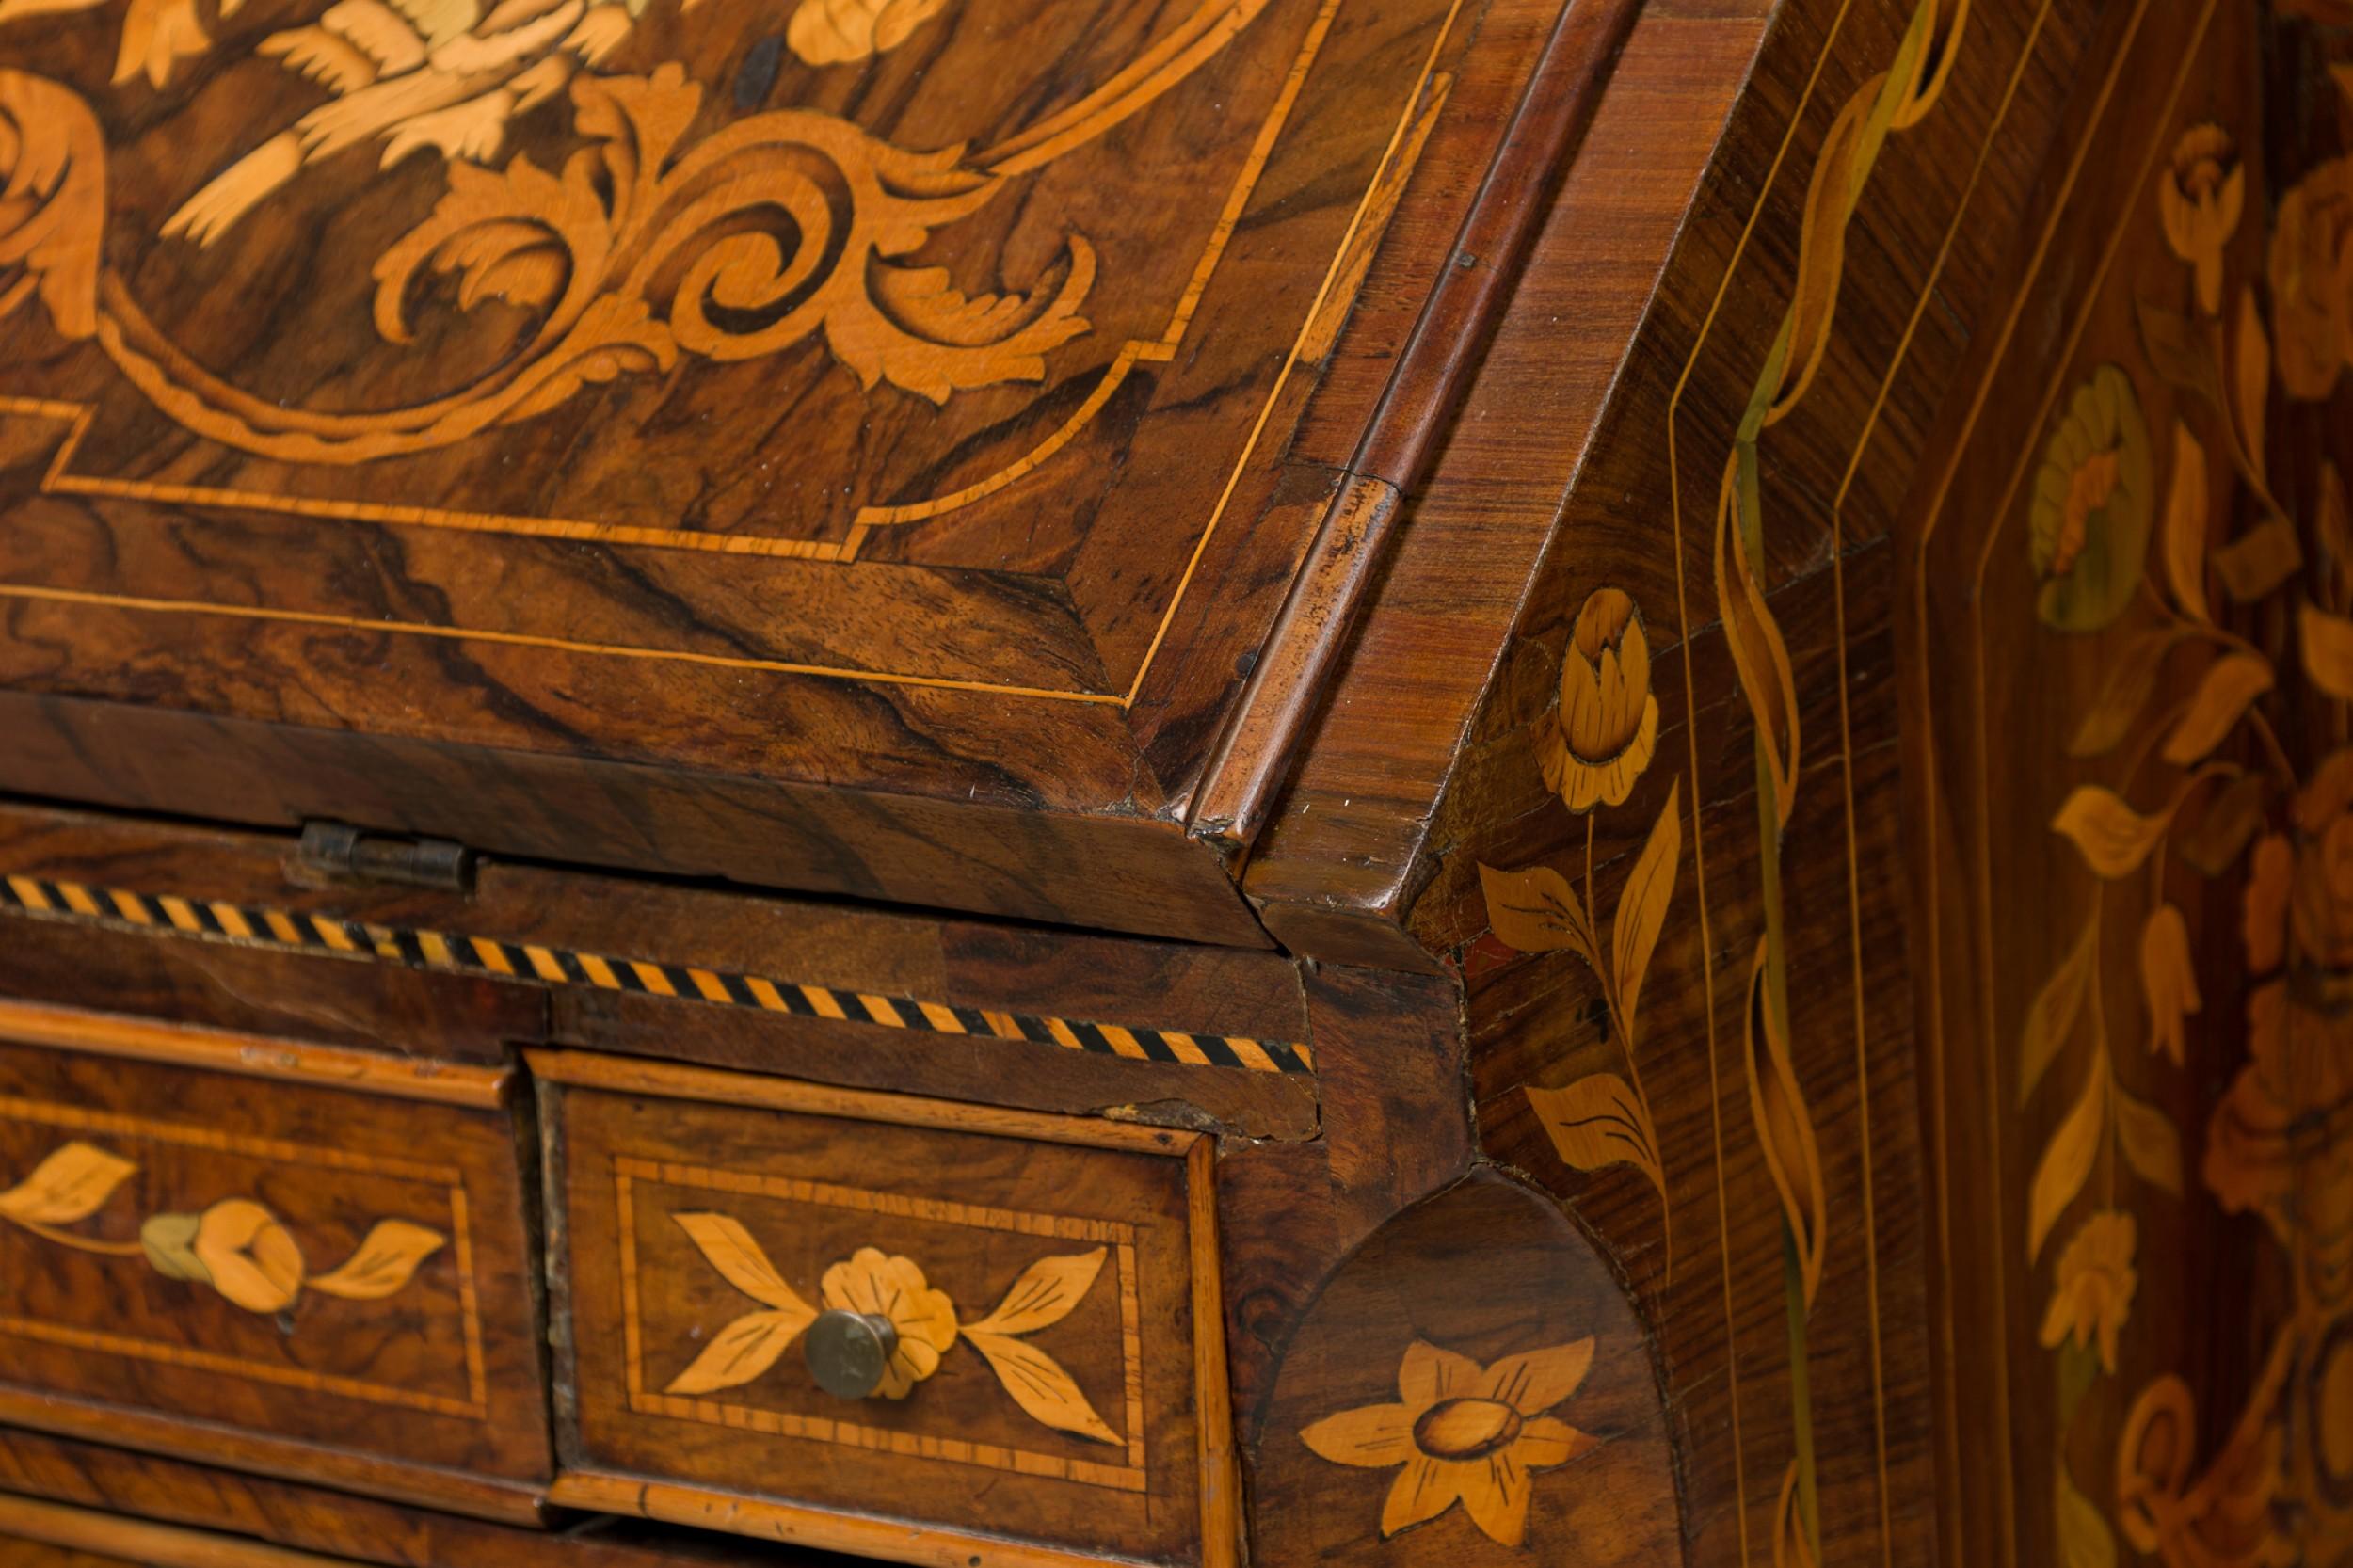 Dutch Rococo (Late 18th Century) drop front desk / secretary with elaborate foliate marquetry inlay, with the slant front folds down to create a desk surface with a green leather inset in front of a series of small drawers and compartments, over